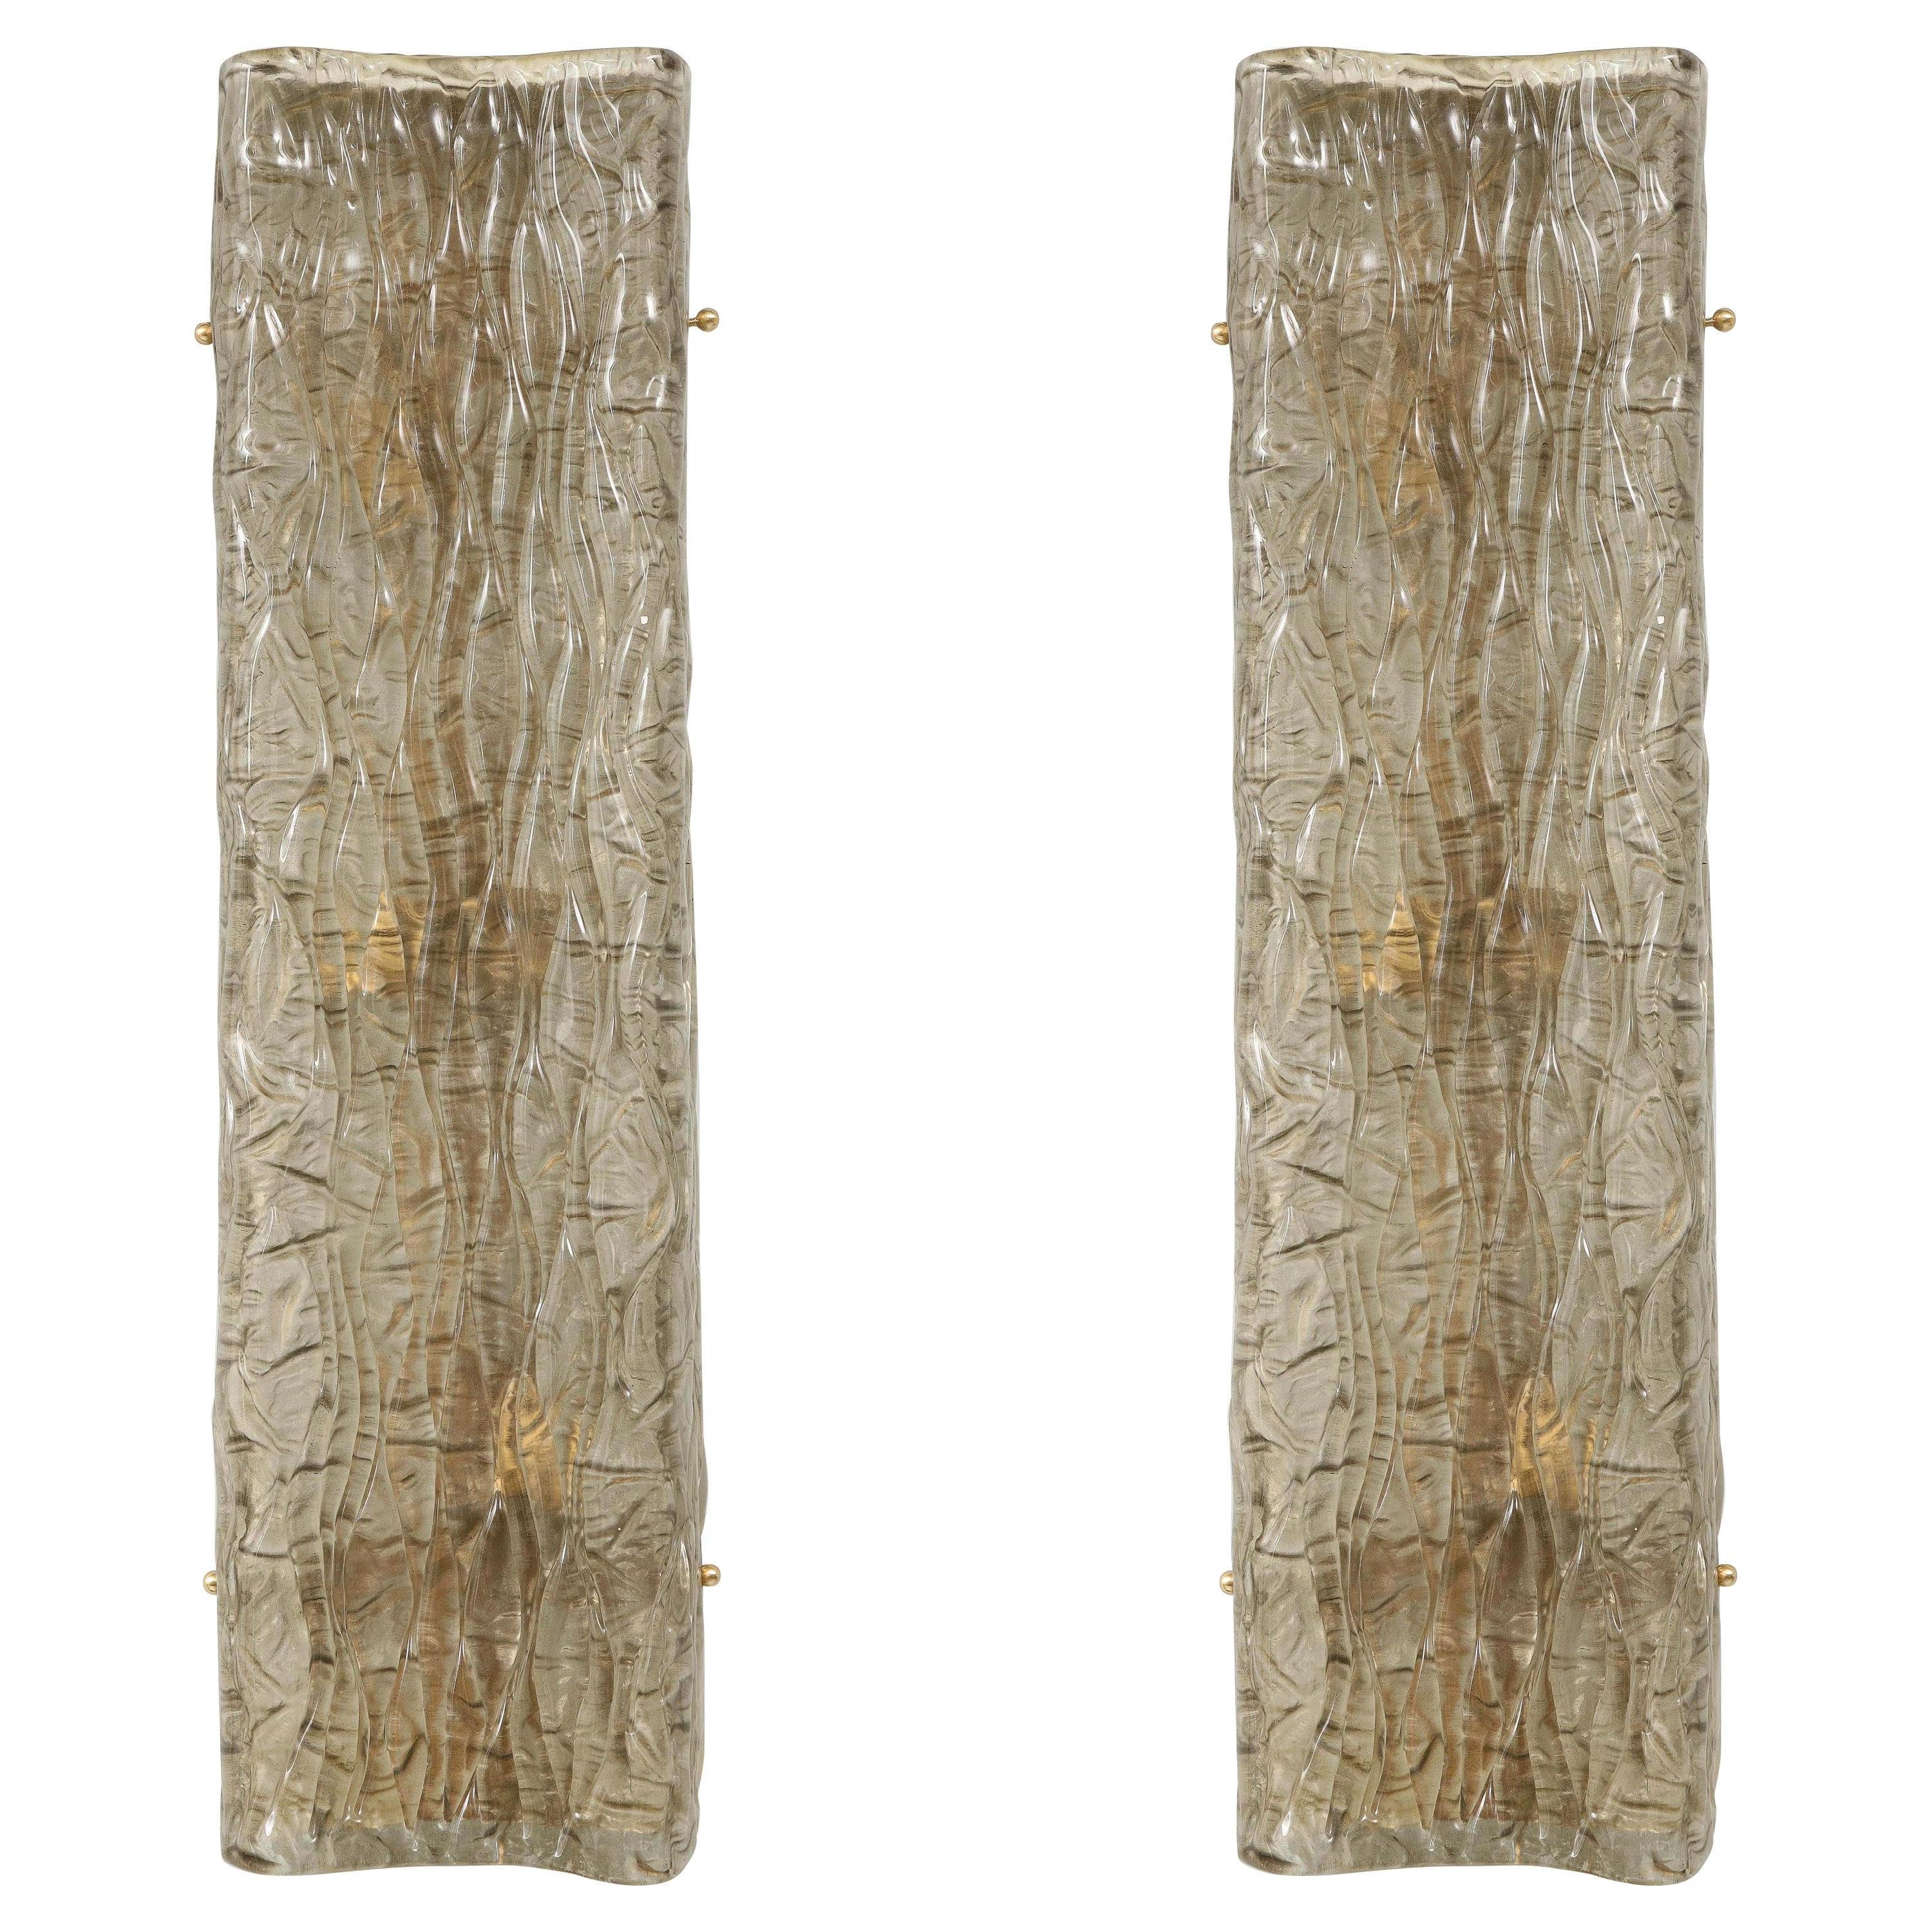 Tall wall sconces in a slightly smoked glass with veins. Each sconce has four lights. American wired. 